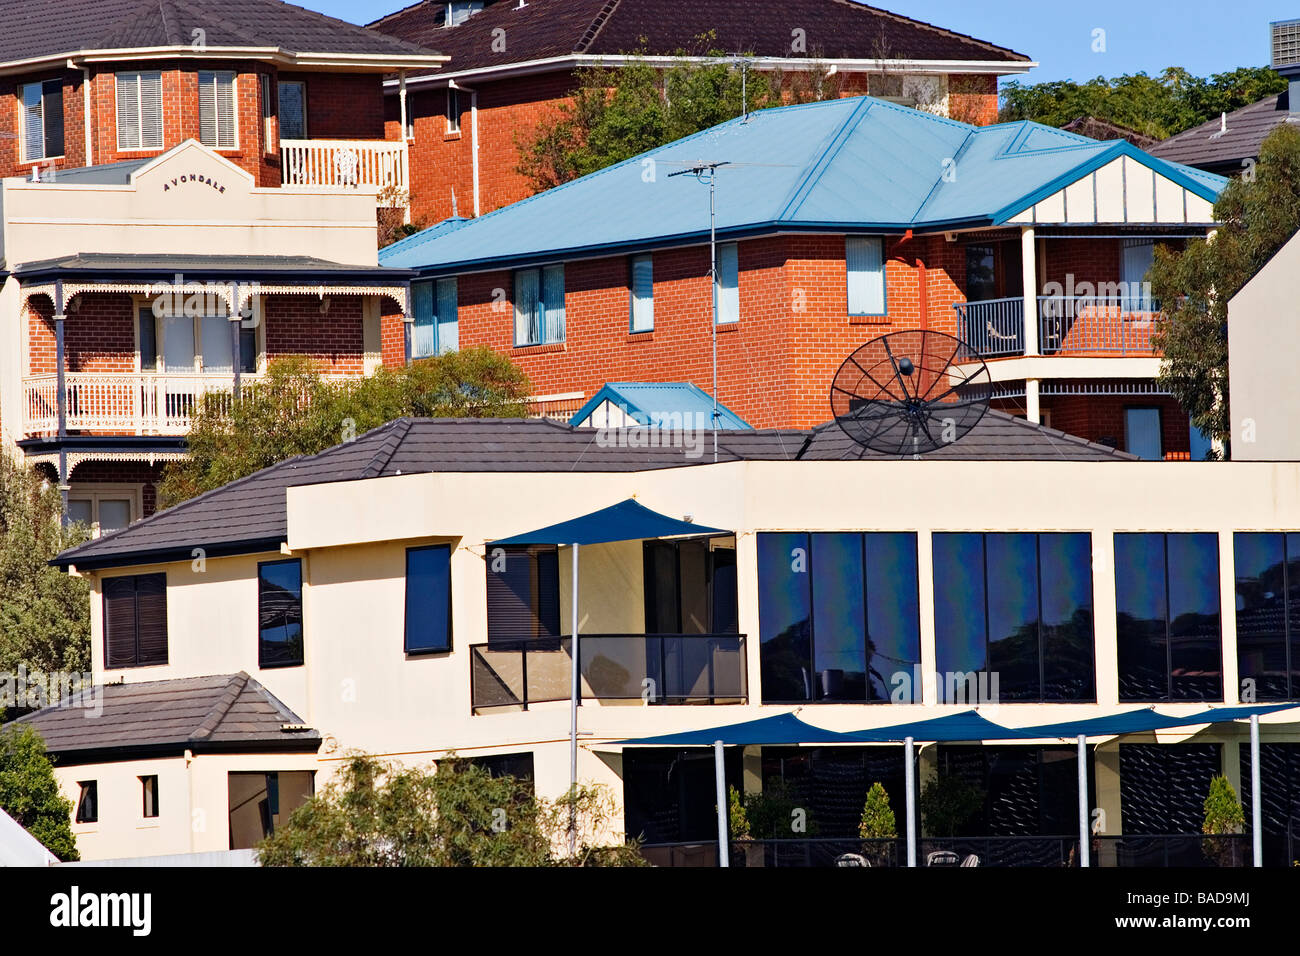 Residential Homes /  Australian homes on an housing estate.The location is Melbourne Victoria Australia. Stock Photo